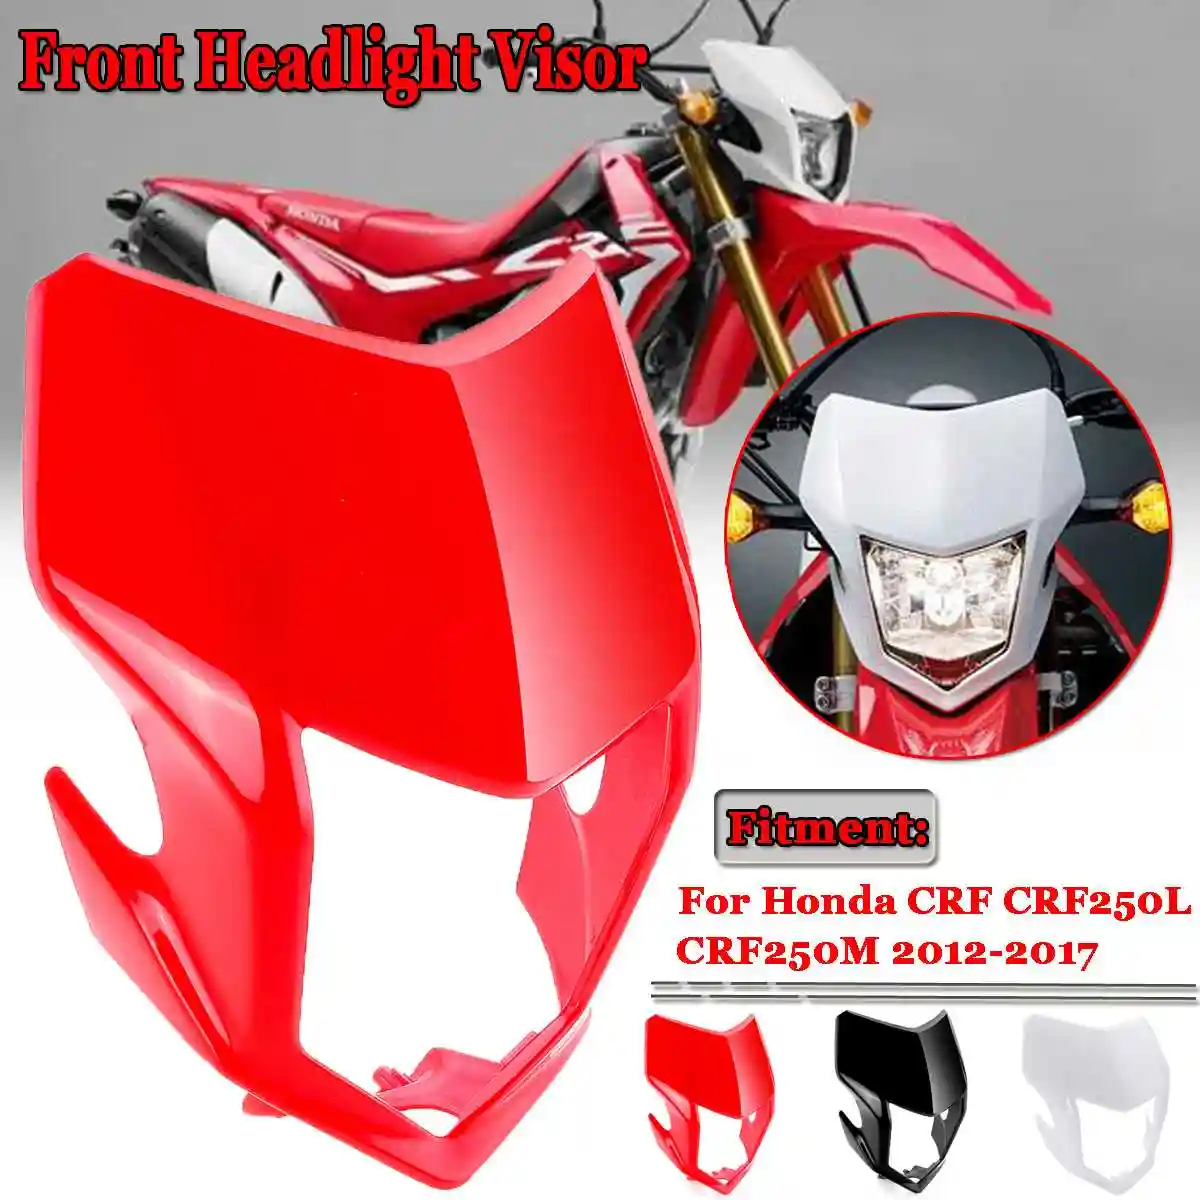 3 Color Motorcycle Front Headlight Lamp Visor Fairing Windshield Protective For Honda Crf Crf250l Crf250m 12 17 Aliexpress